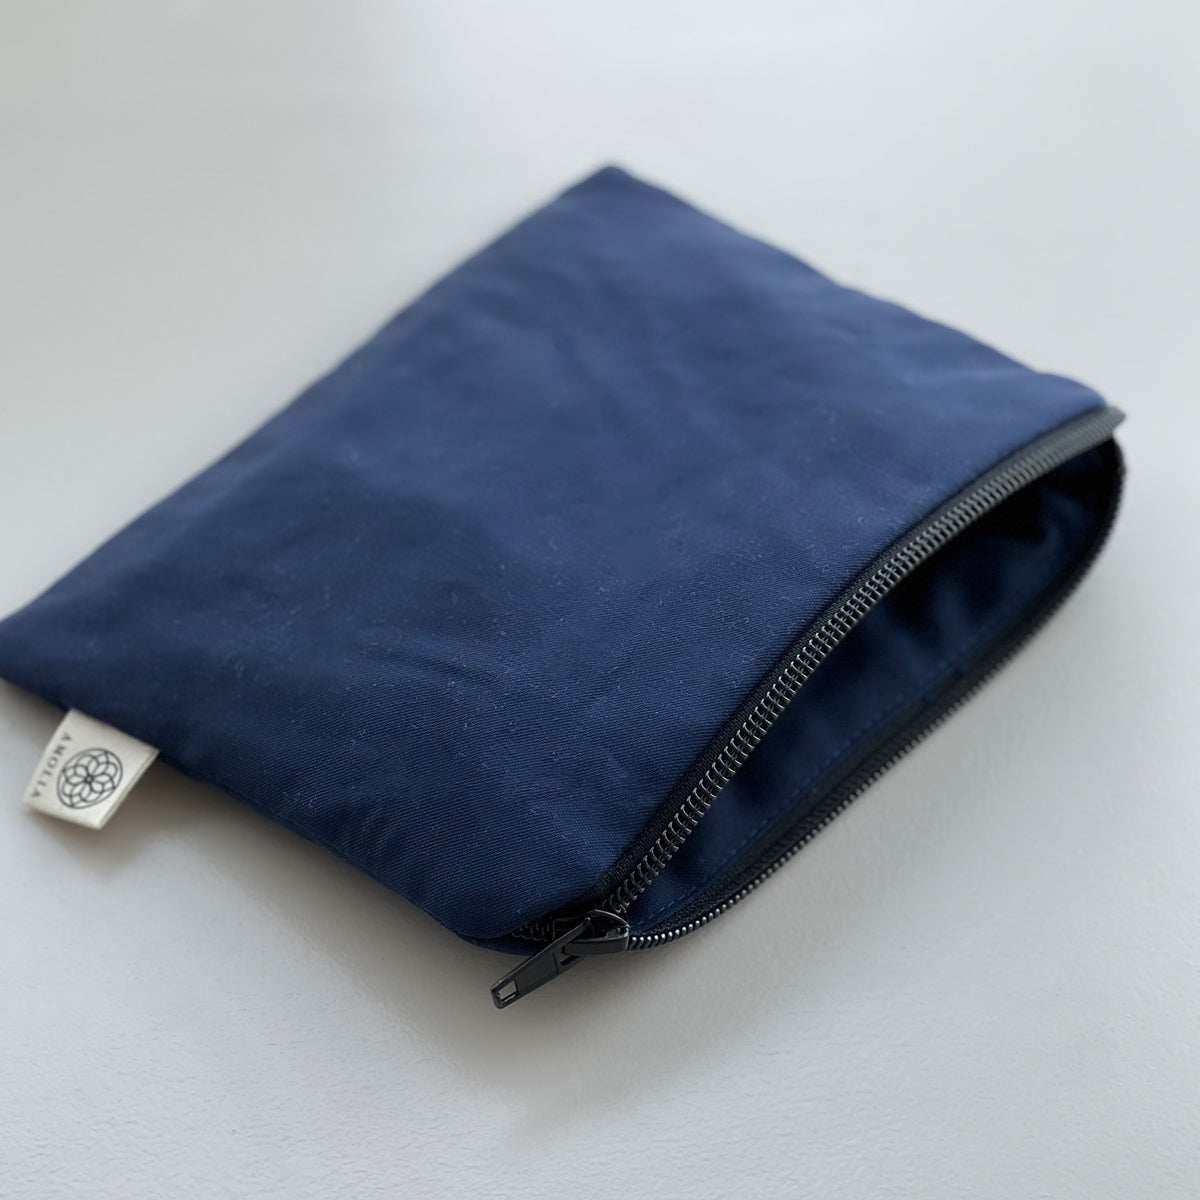 Upcycled bag, small, navy blue